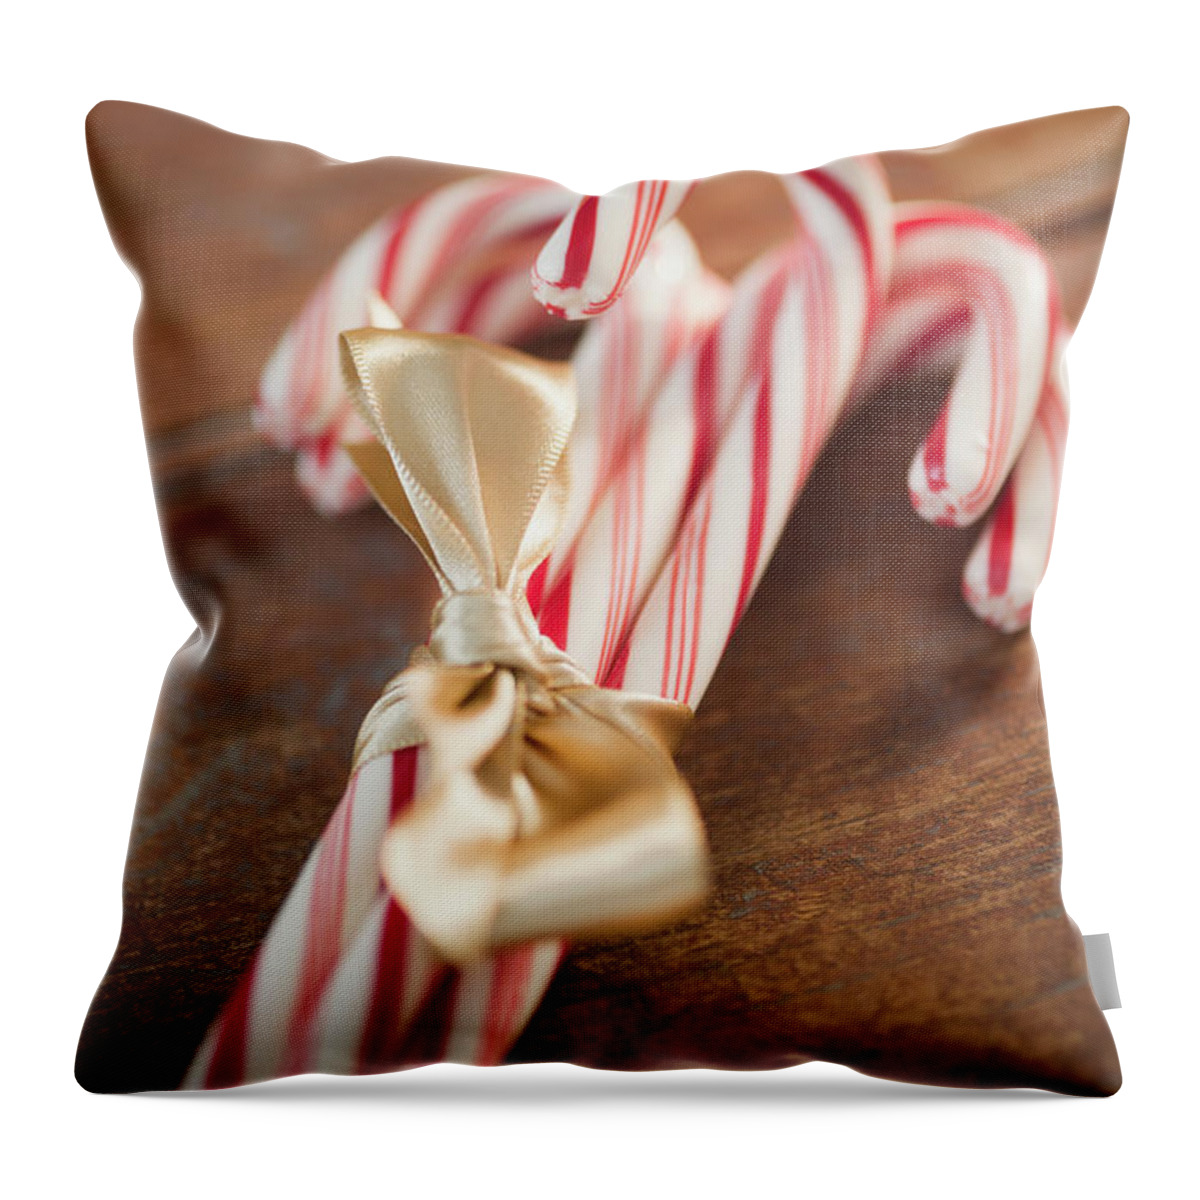 Close-up Throw Pillow featuring the photograph Usa, New Jersey, Jersey City, Candy by Jamie Grill